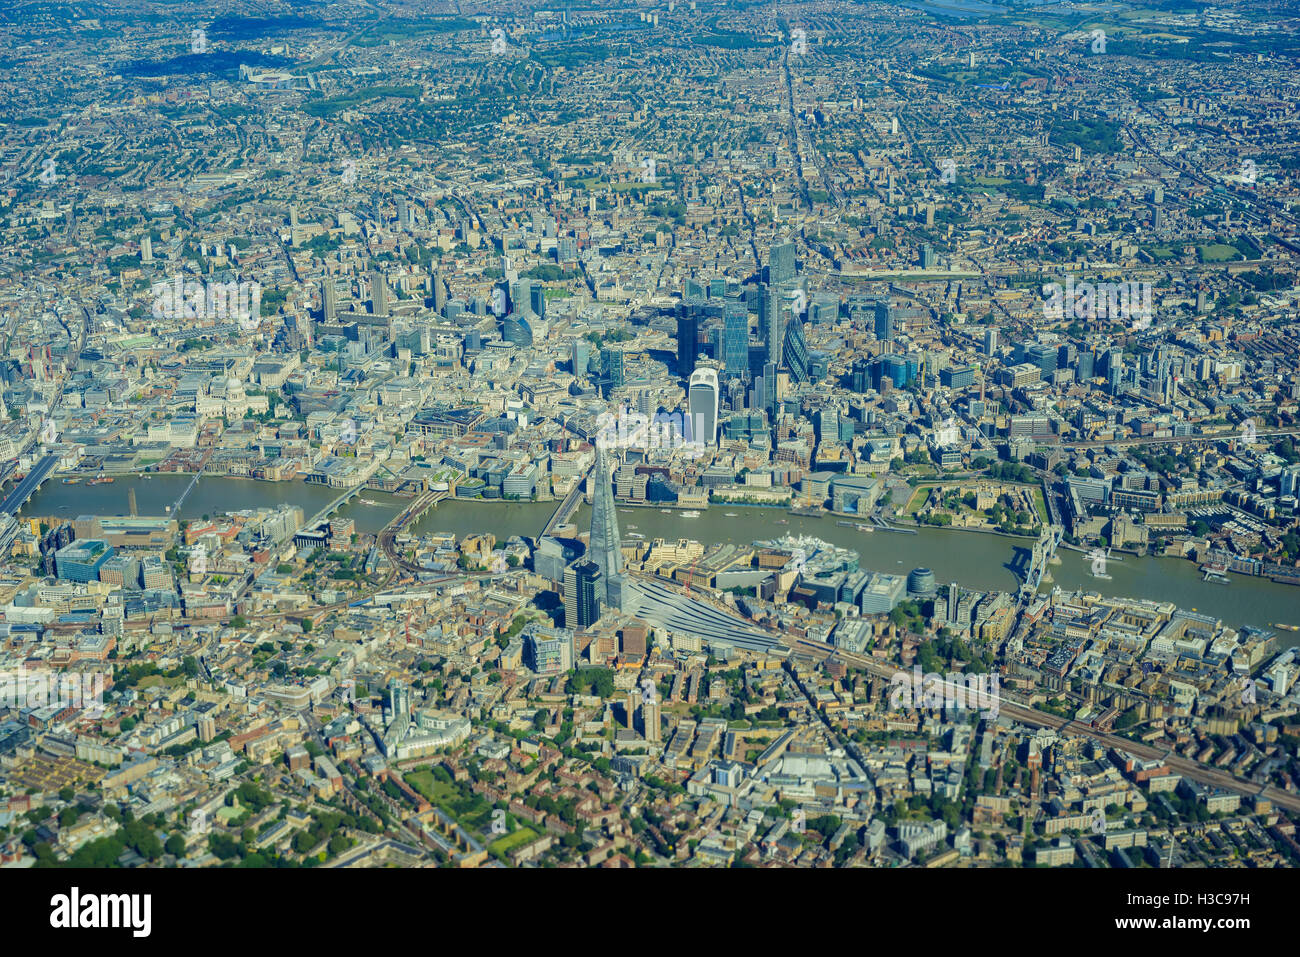 Aerial view of Clerkenwell, Farringdon, Barbican, Whitechapel, Wapping, Southwark of London, United Kingdom Stock Photo